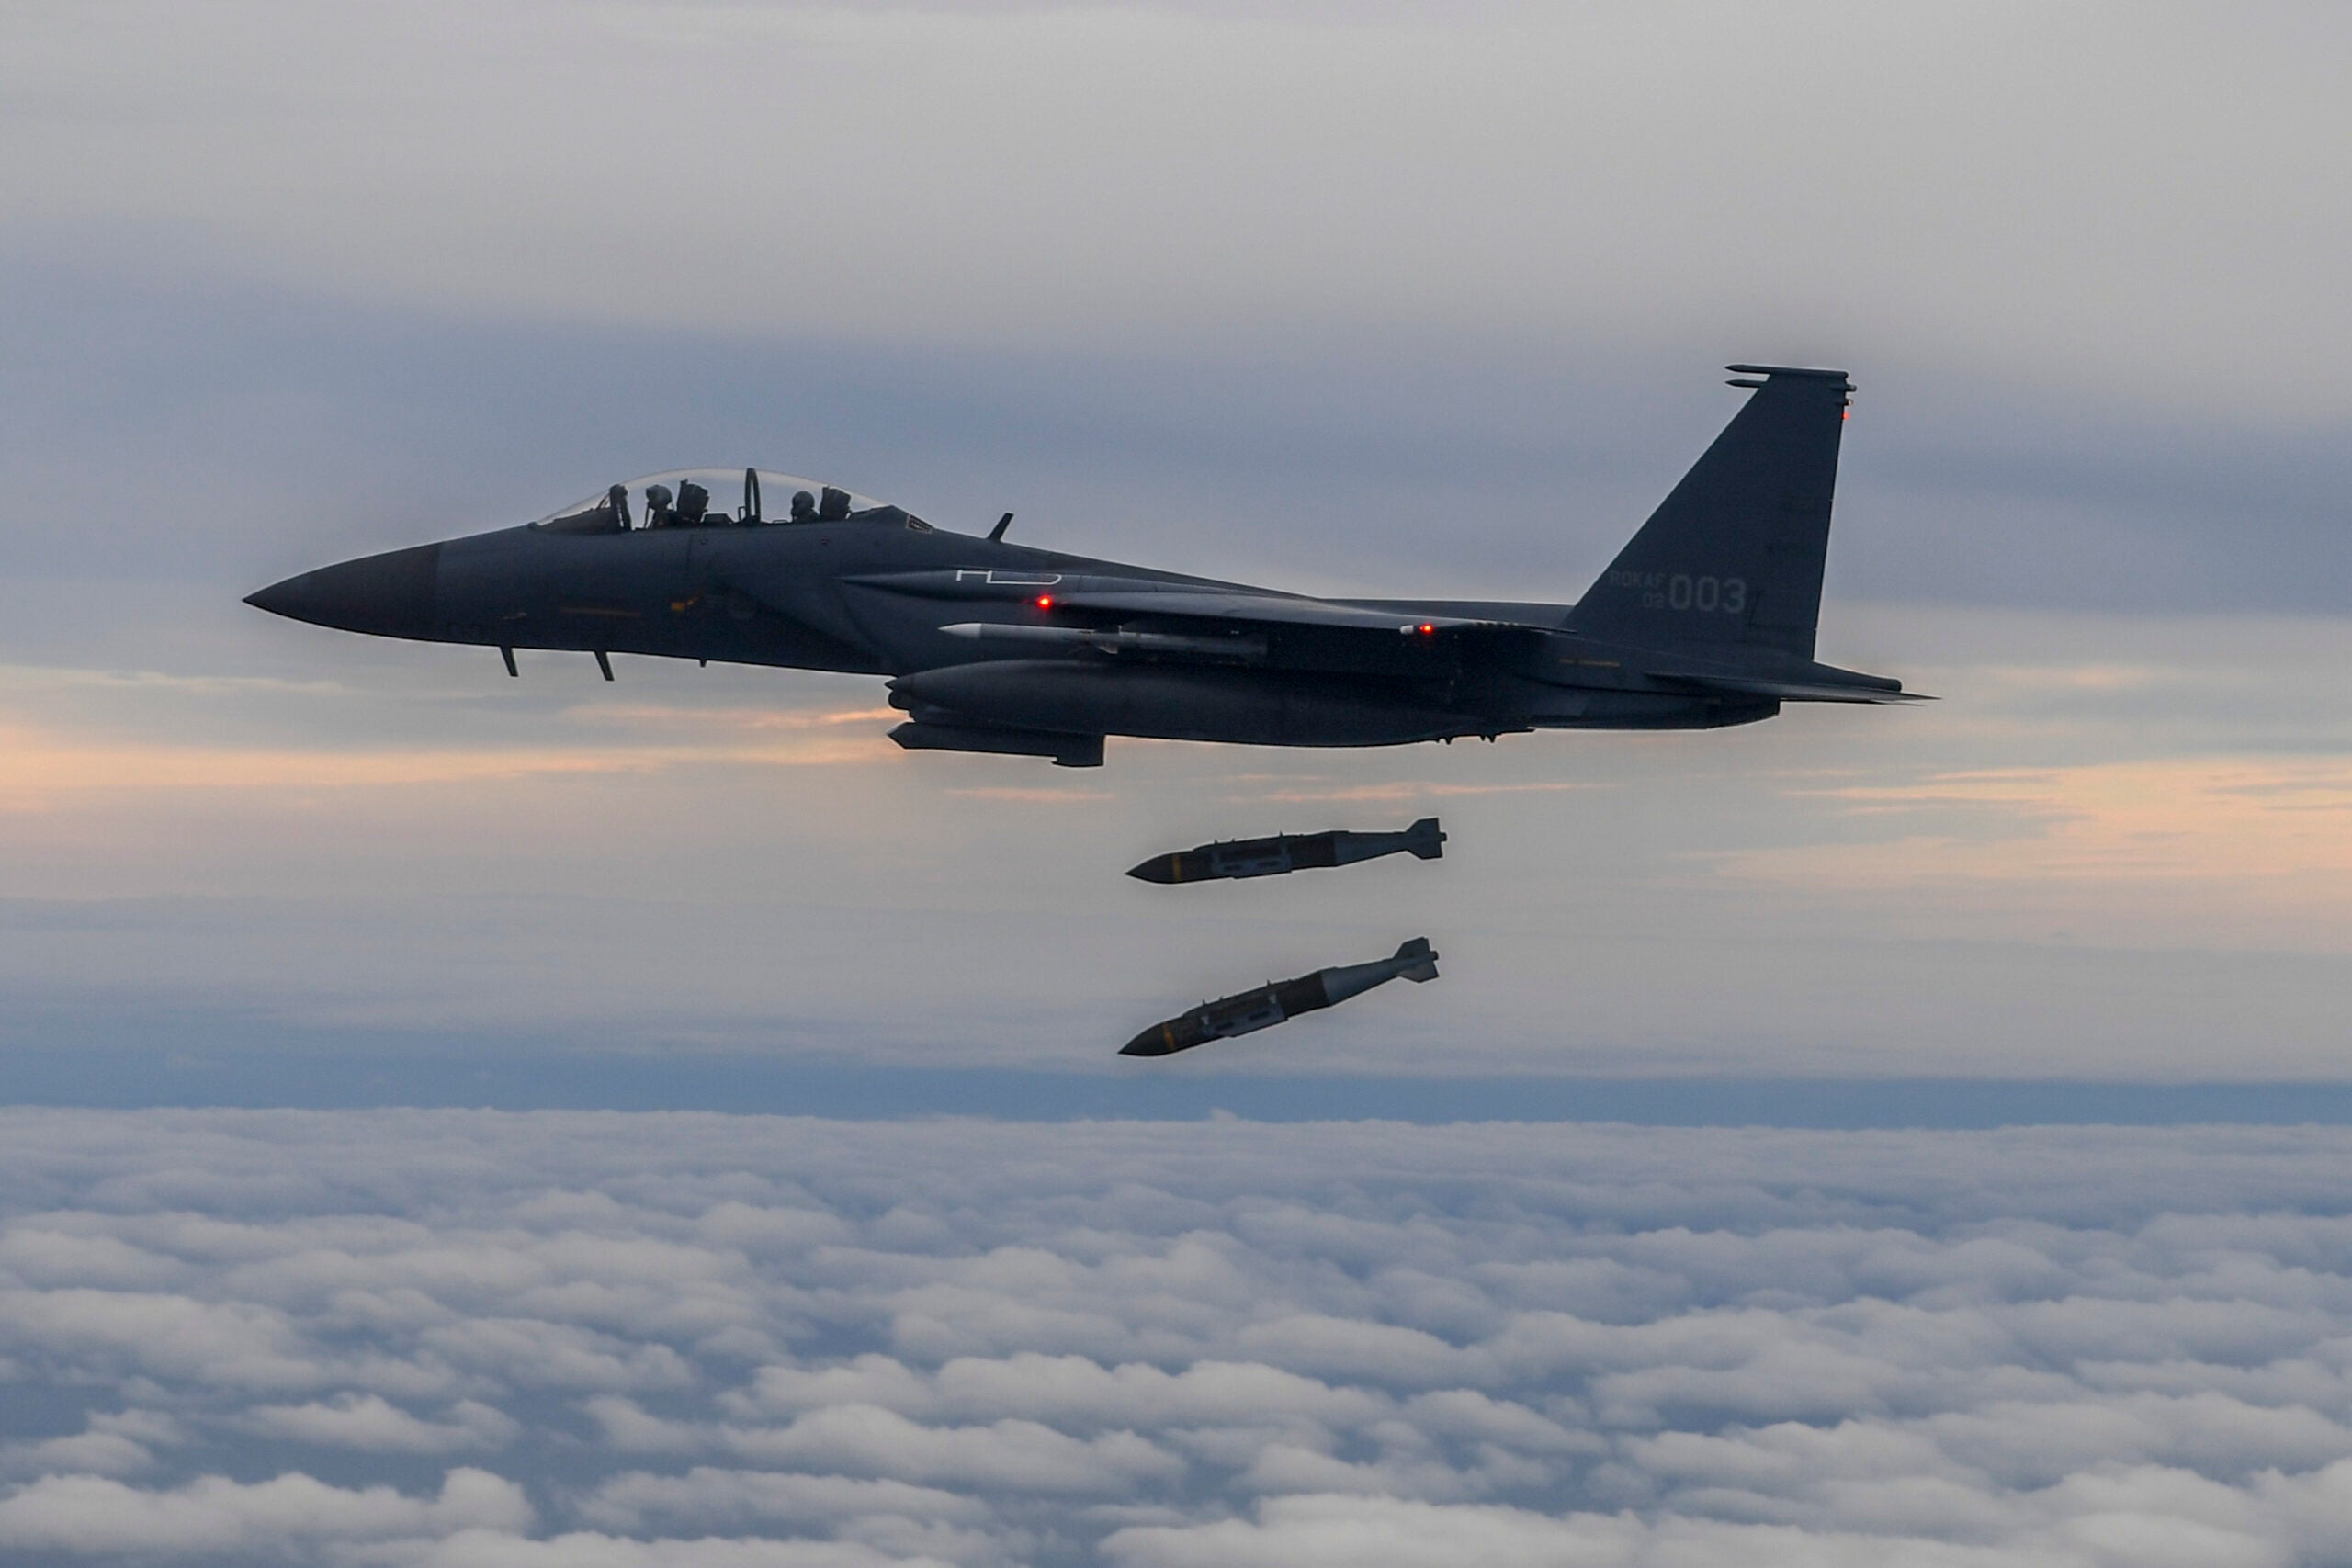 UNDISCLOSED LOCATION - OCTOBER 04: In this handout image released by the South Korean Defense Ministry, A South Korean F-15K fighter fires two Joint Direct Attack Munition (JADAM) bombs into an island target in response to North Korea's intermediate-range ballistic missile (IRBM) launch earlier in the day, on October 04, 2022 at an undisclosed location. North Korea fired an intermediate-range ballistic missile (IRBM) over Japan on Tuesday in its first launch of an IRBM in eight months, according to South Korea’s military. (Photo by South Korean Defense Ministry via Getty Images)